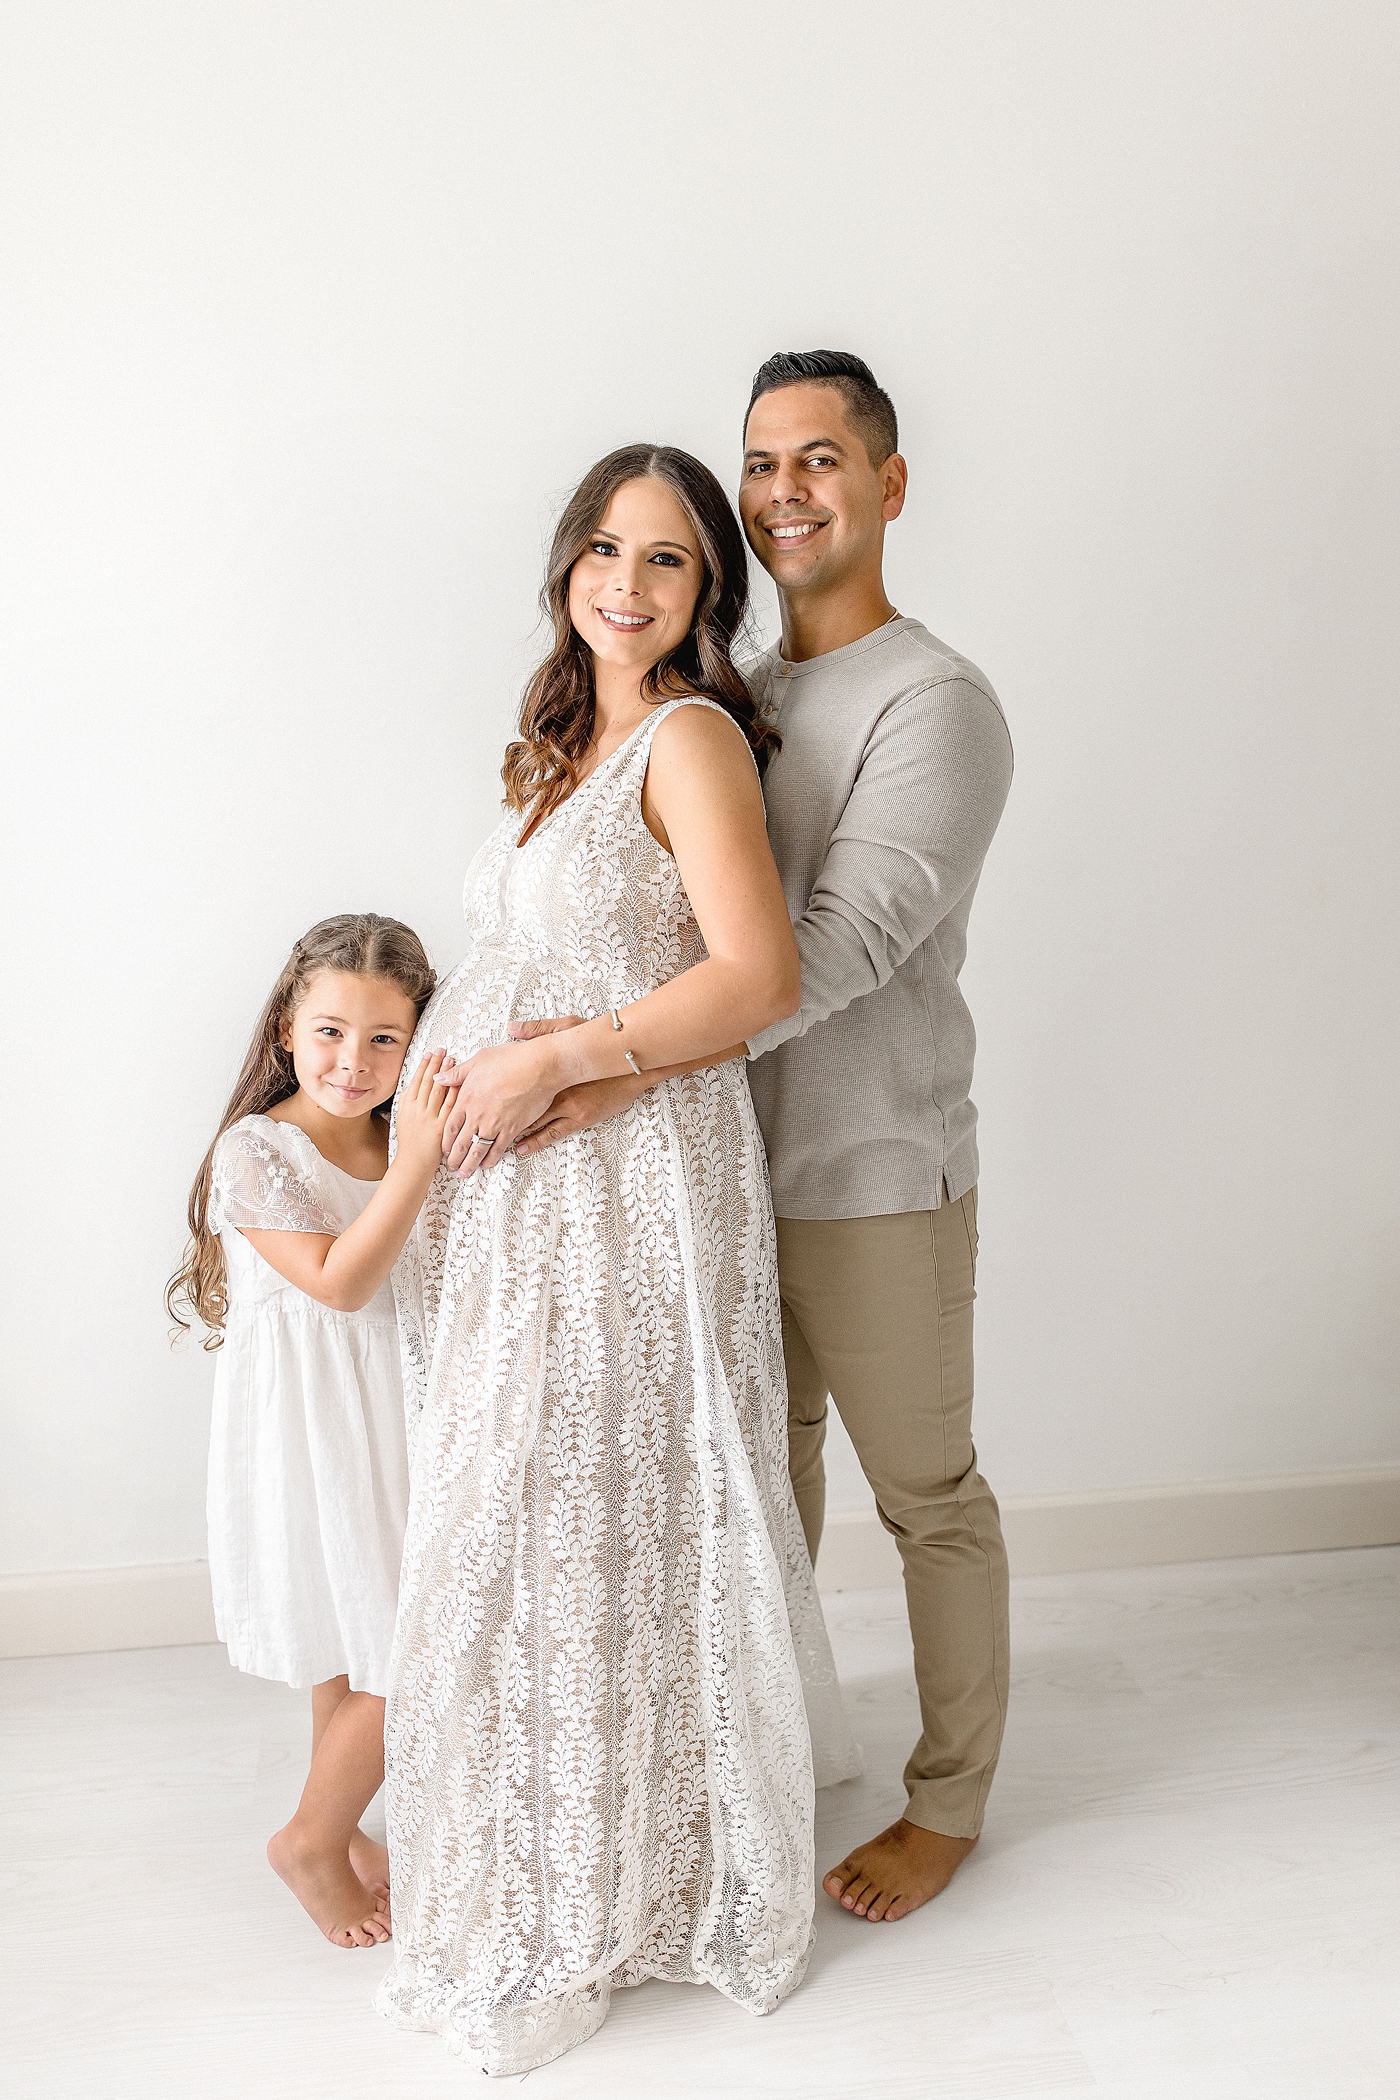 Family of three during Miami maternity session. Photo by Ivanna Vidal Photography.